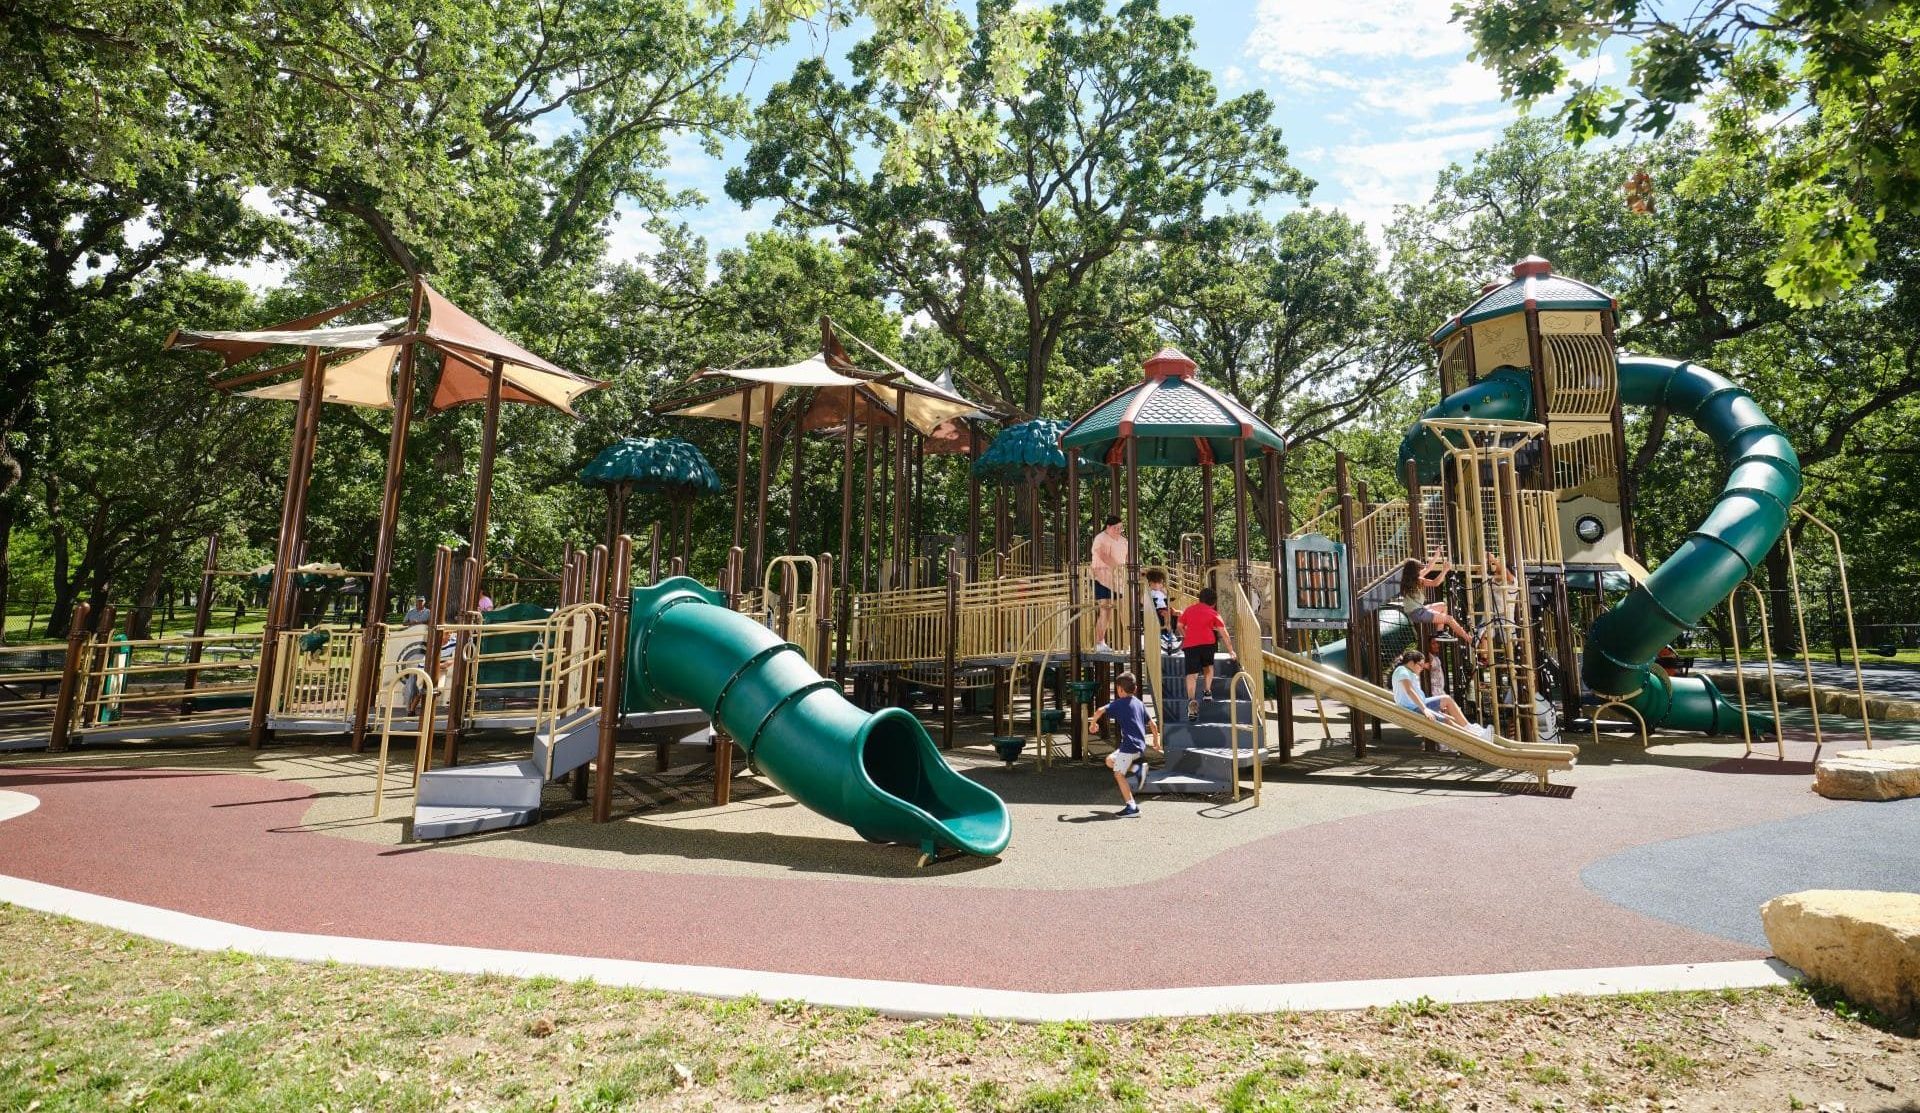 Playground at Augsburg Park in MN with safety surfacing